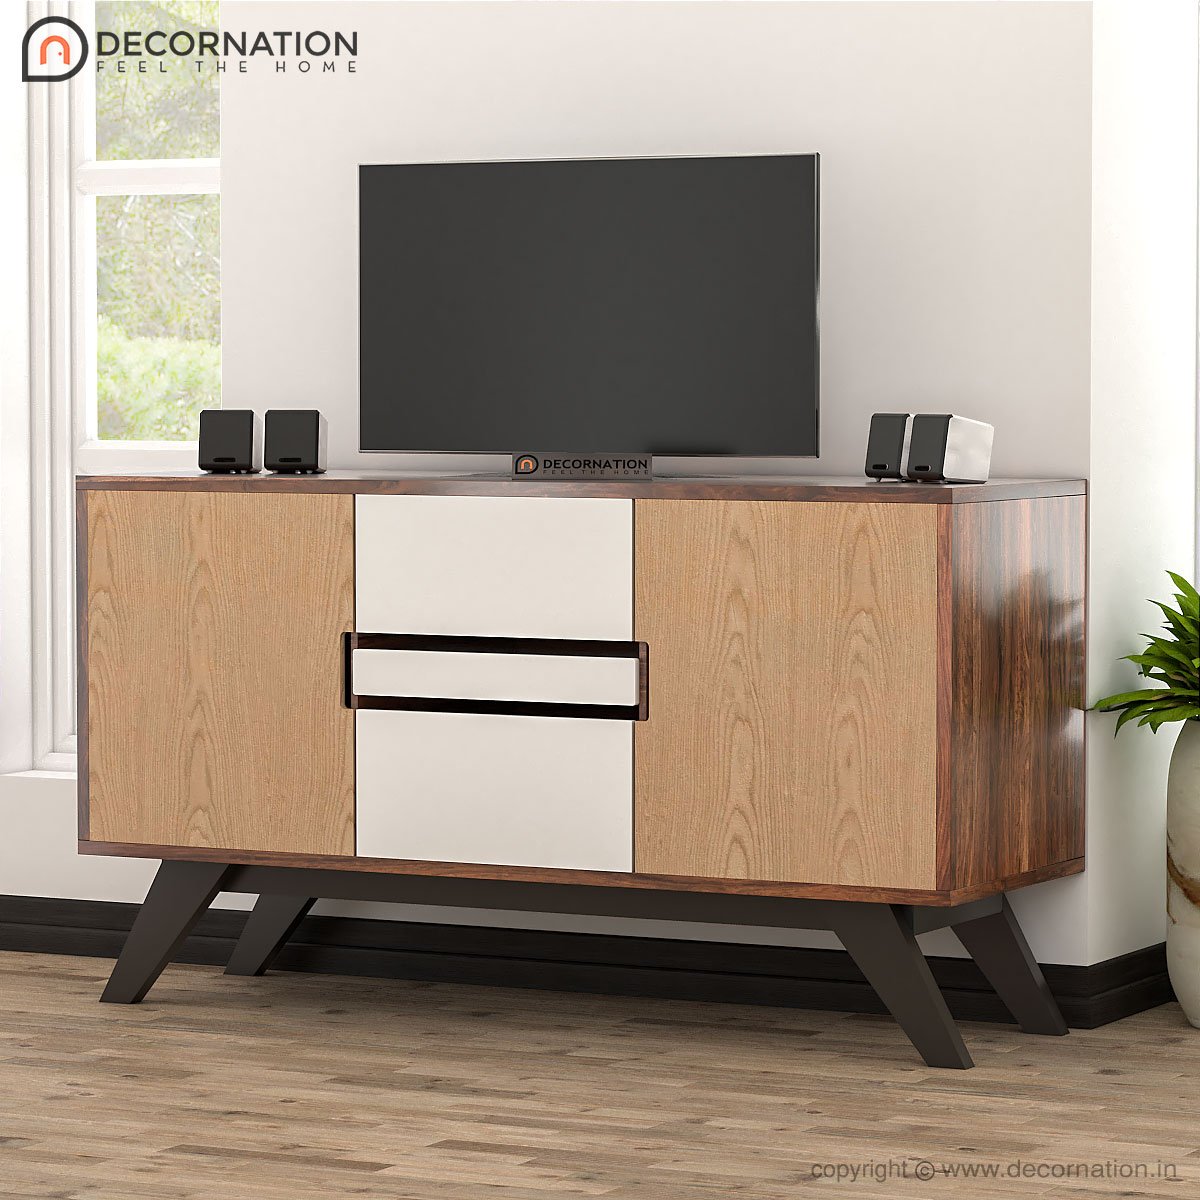 Dysis Wooden TV Stand With Storage – Brown